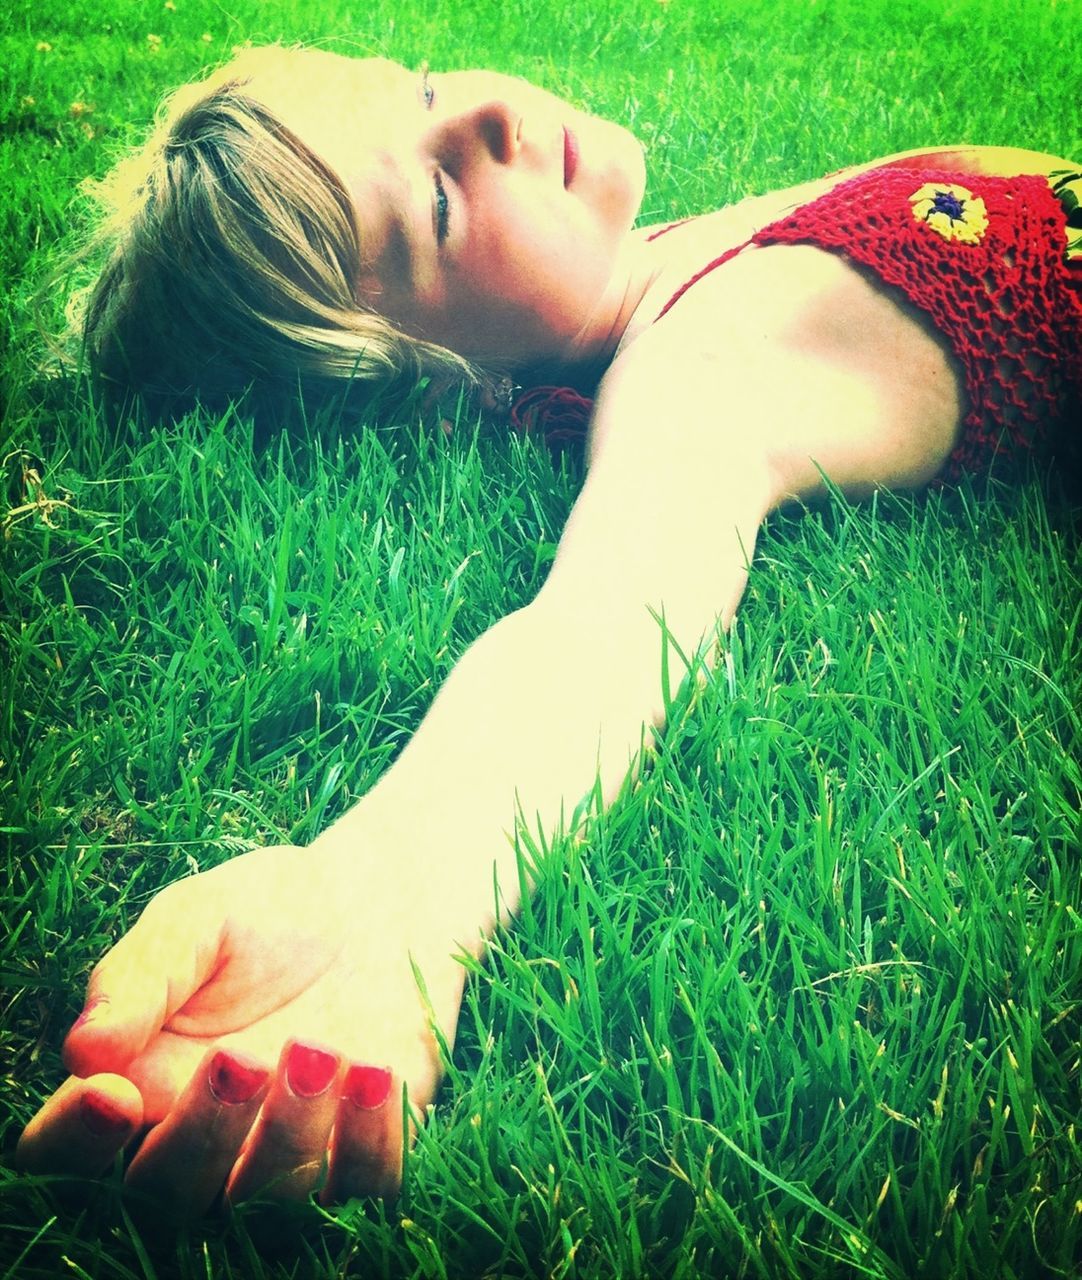 YOUNG WOMAN LYING DOWN ON GRASS